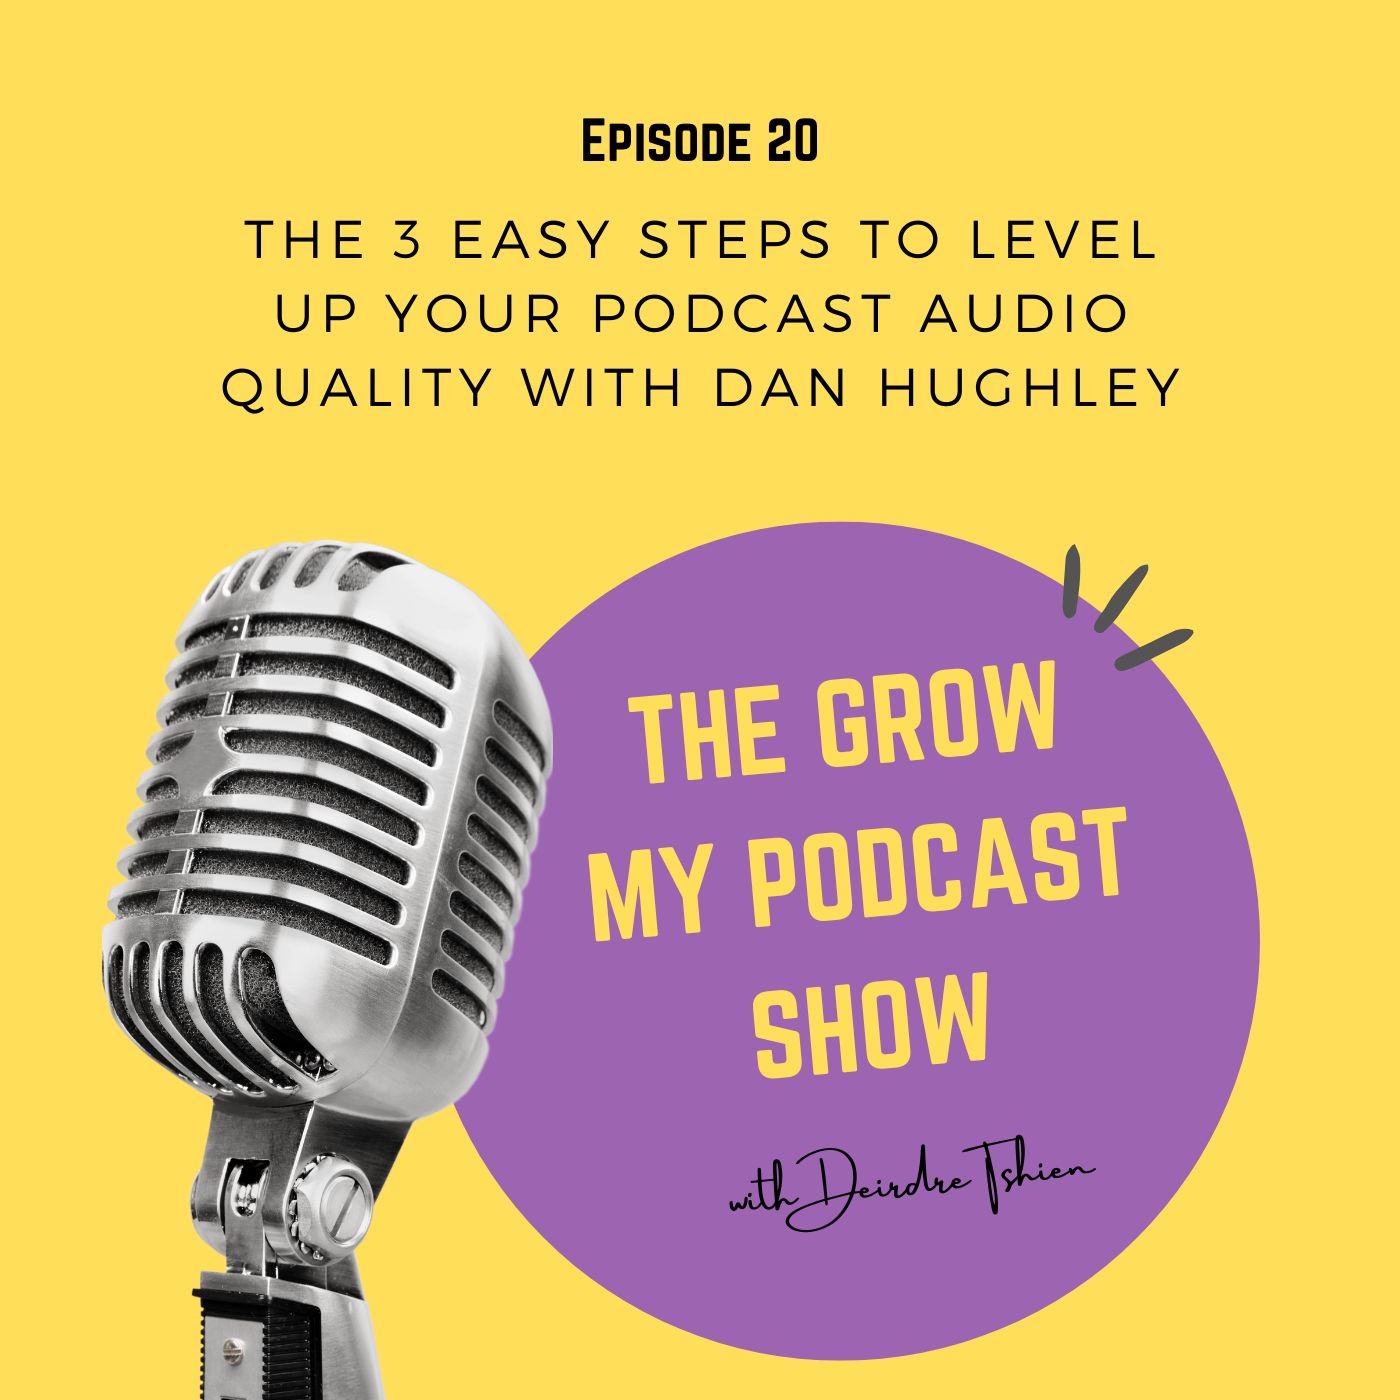 The 3 Easy Steps to Level Up Your Podcast Audio Quality with Dan Hughley Image